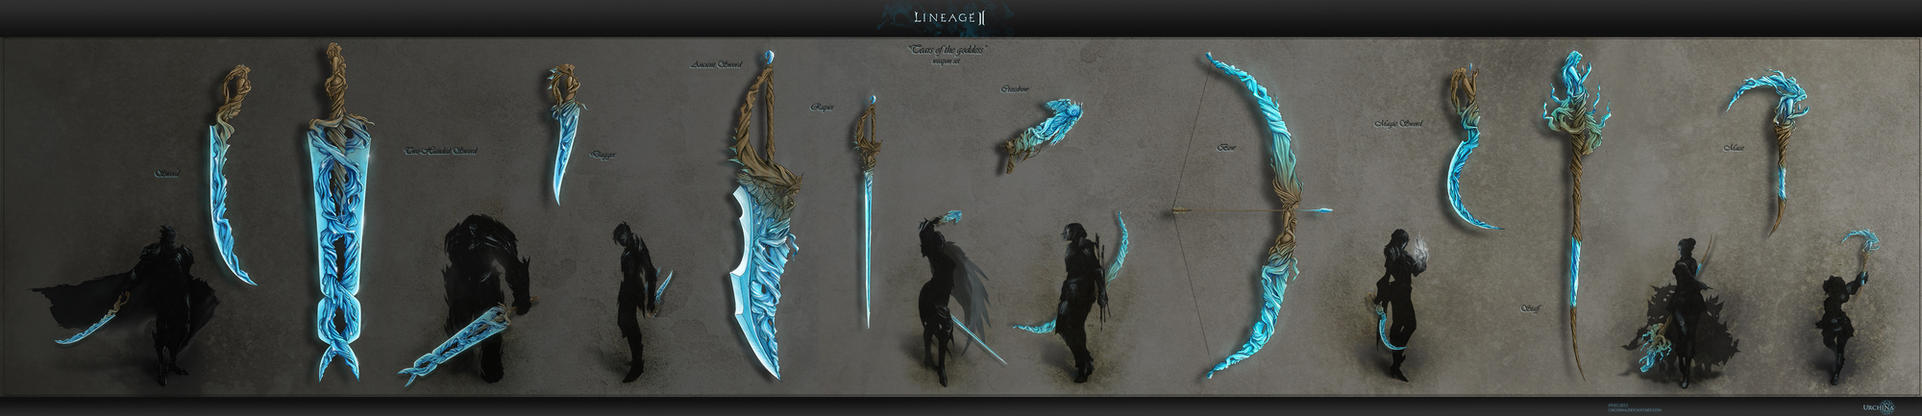 Weapon set Lineage 2 Tears of the goddess